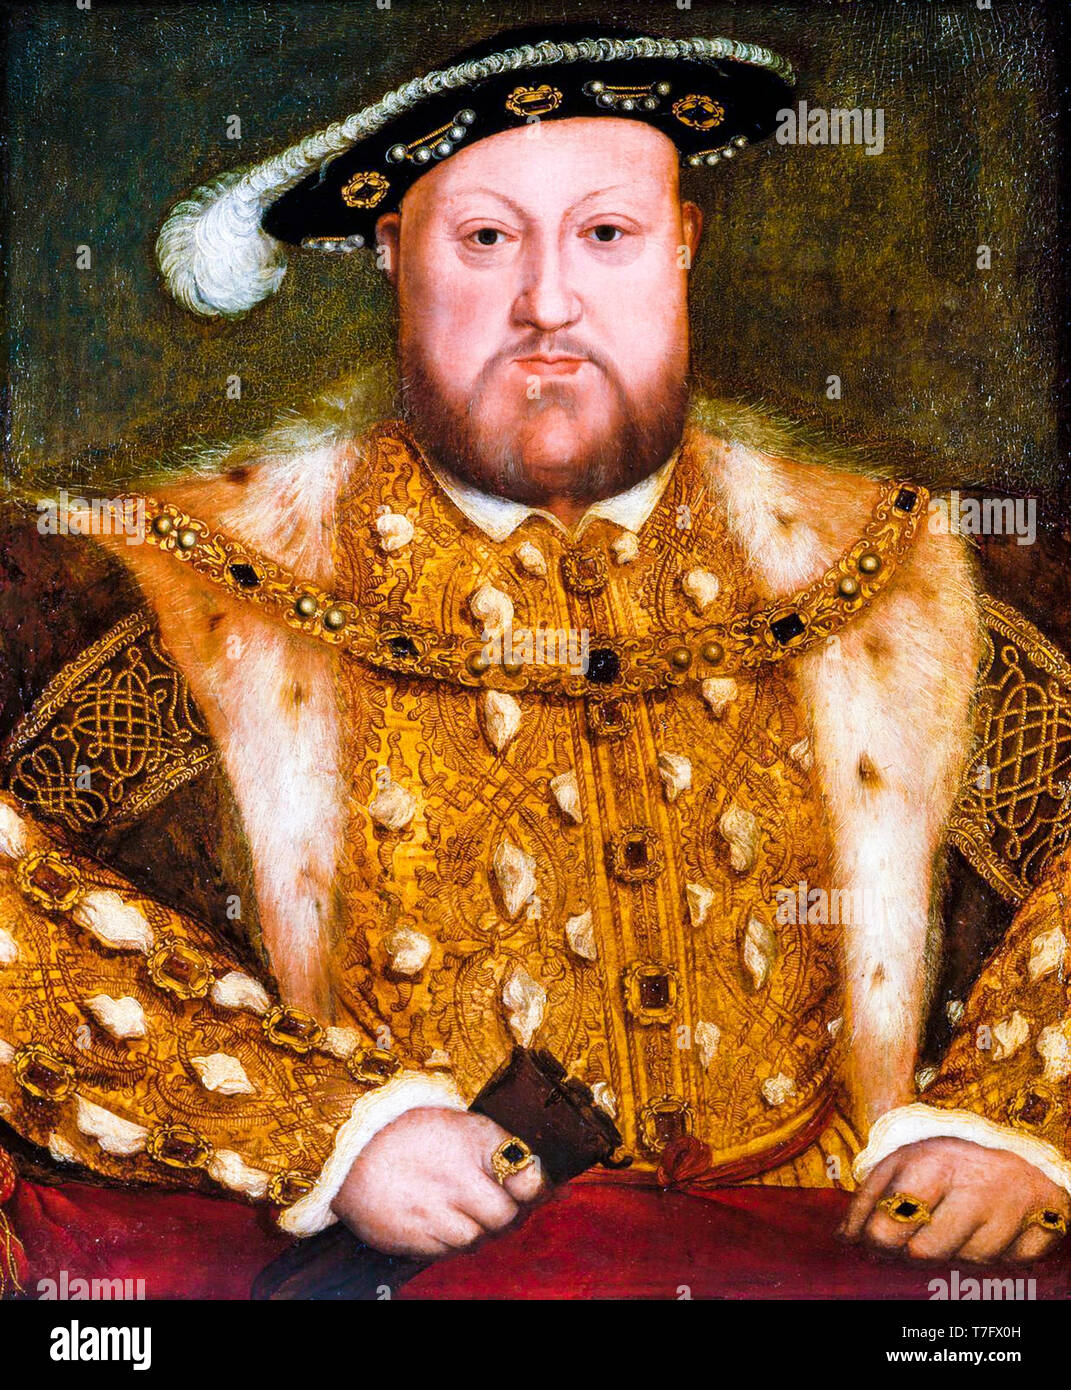 King Henry VIII. Portrait of Henry VIII (1491-1547), painting after Hans Holbein the Younger, c. 1560 Stock Photo